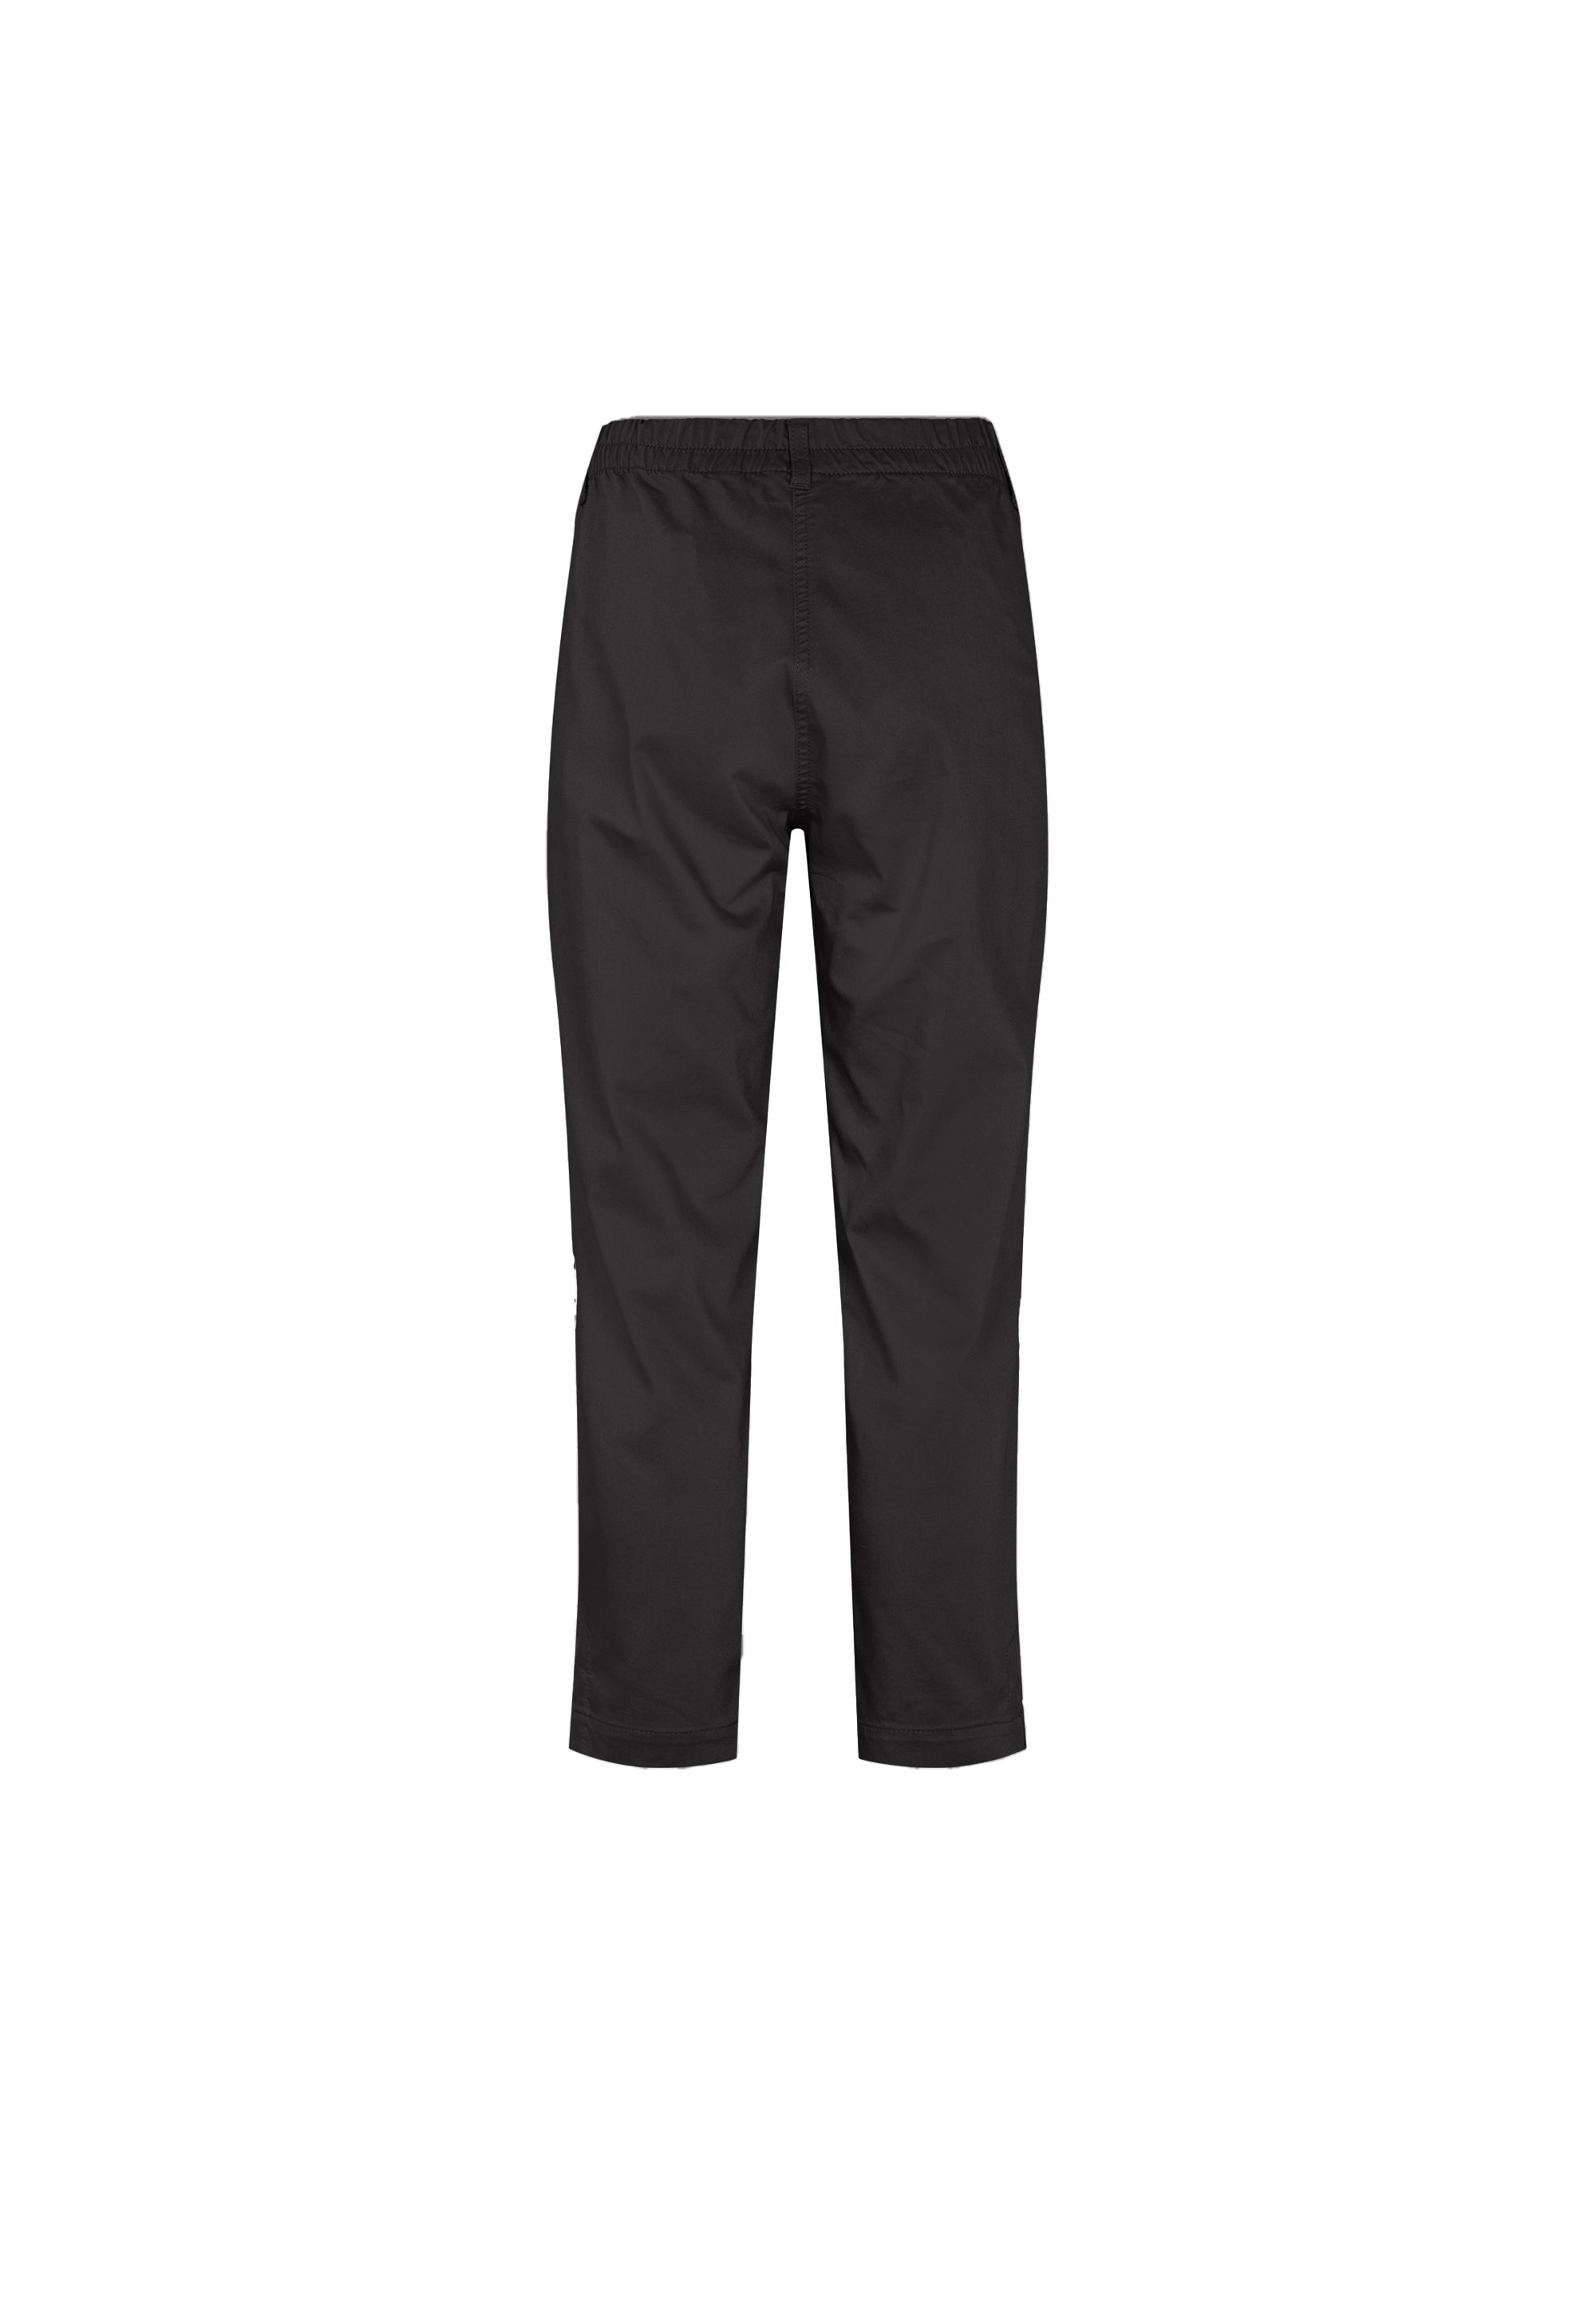 LAURIE Ellie Relaxed - Extra Short Length Trousers RELAXED 99000 Black